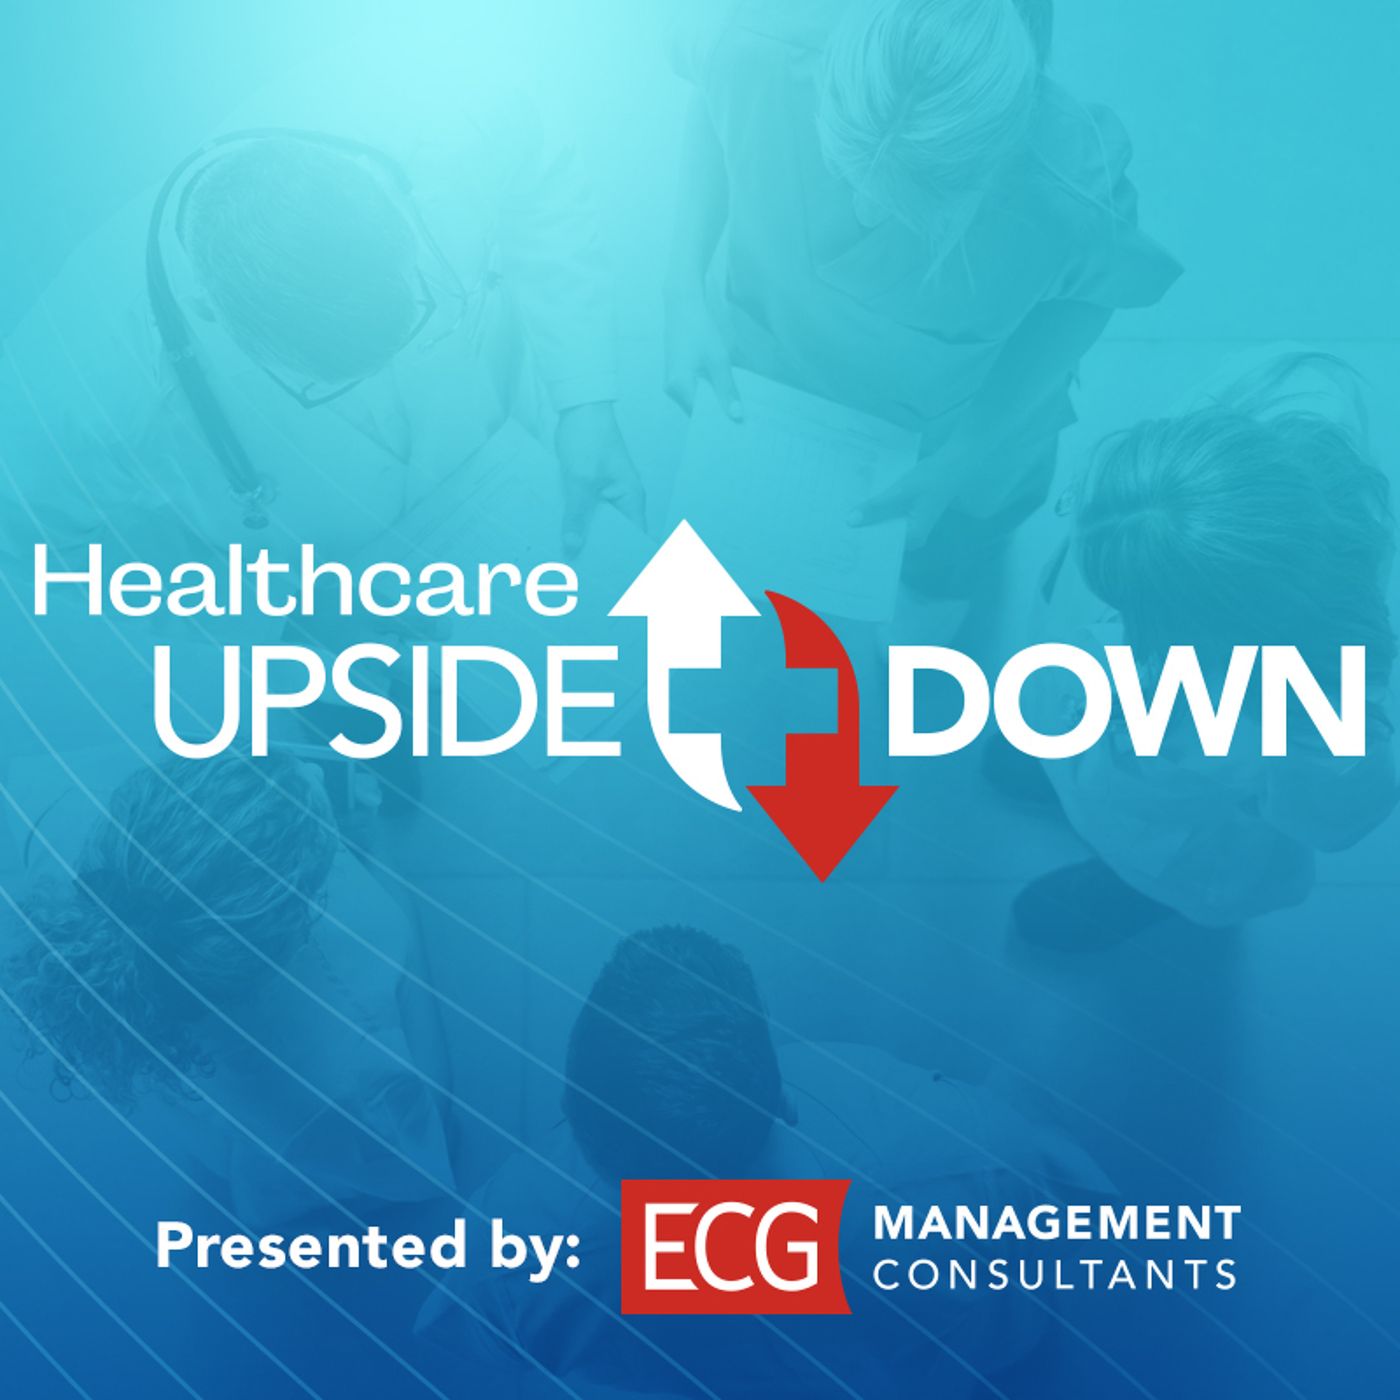 Healthcare Upside/Down: Whatever Happened to the Wonder Years w/ Monika Roots, MD at Bend Health.